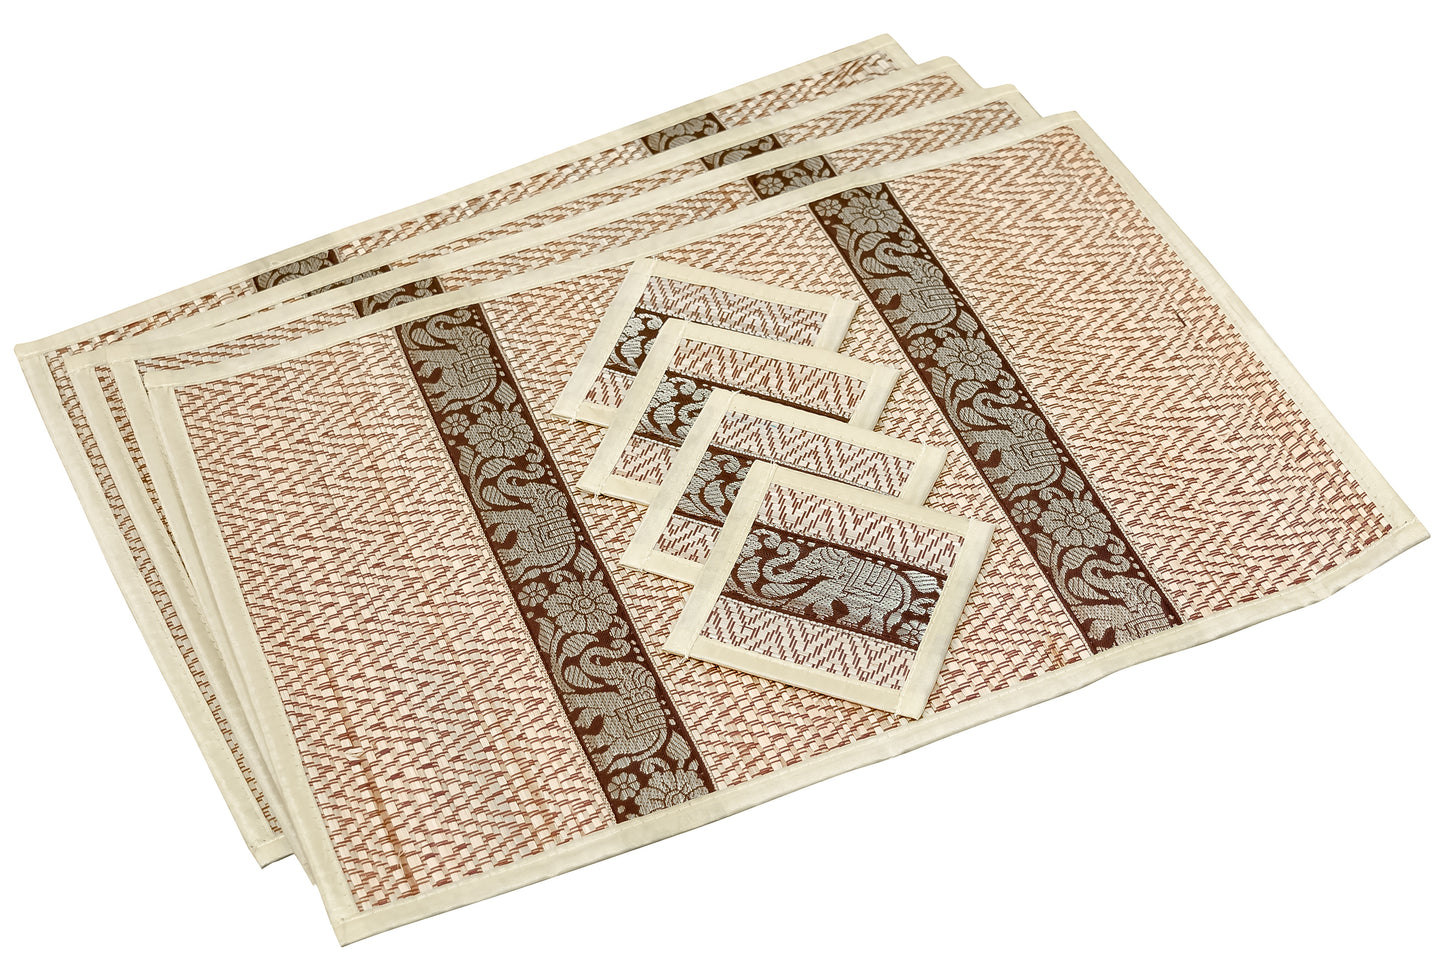 Eco-Friendly Hand-Woven Wicker Reed Thai Style Placemats and Coasters